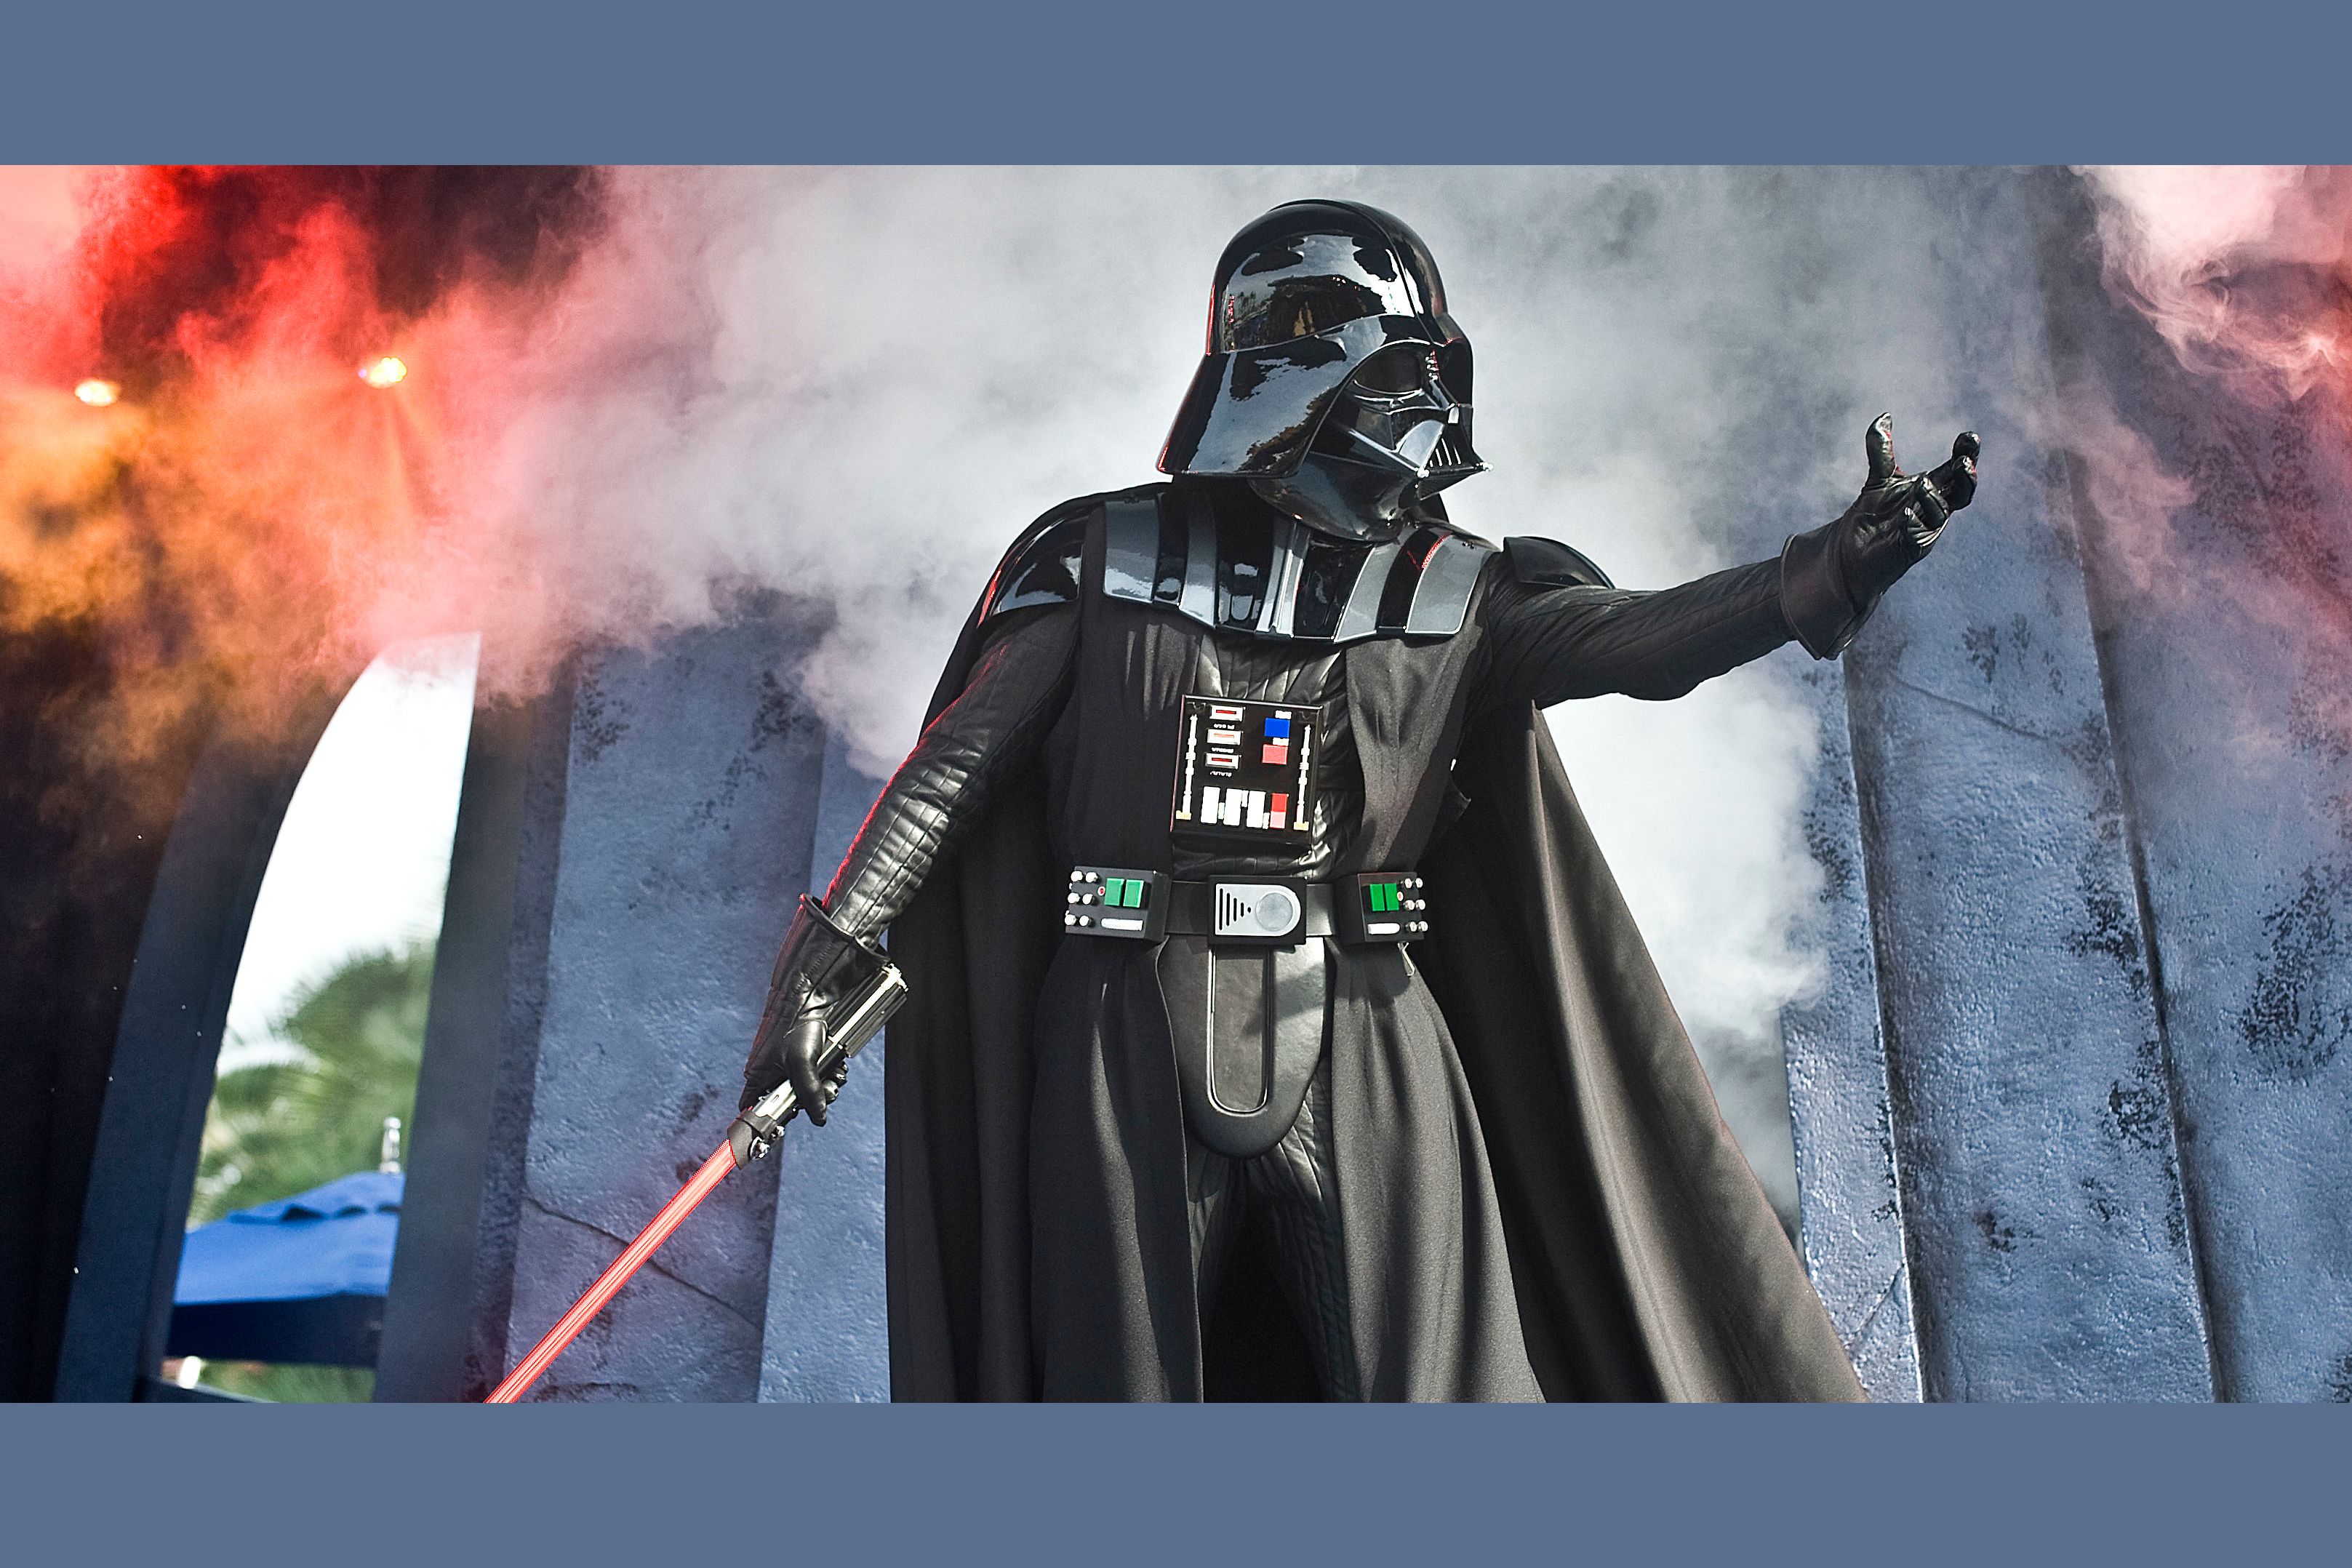 Which Star Wars villain are you?